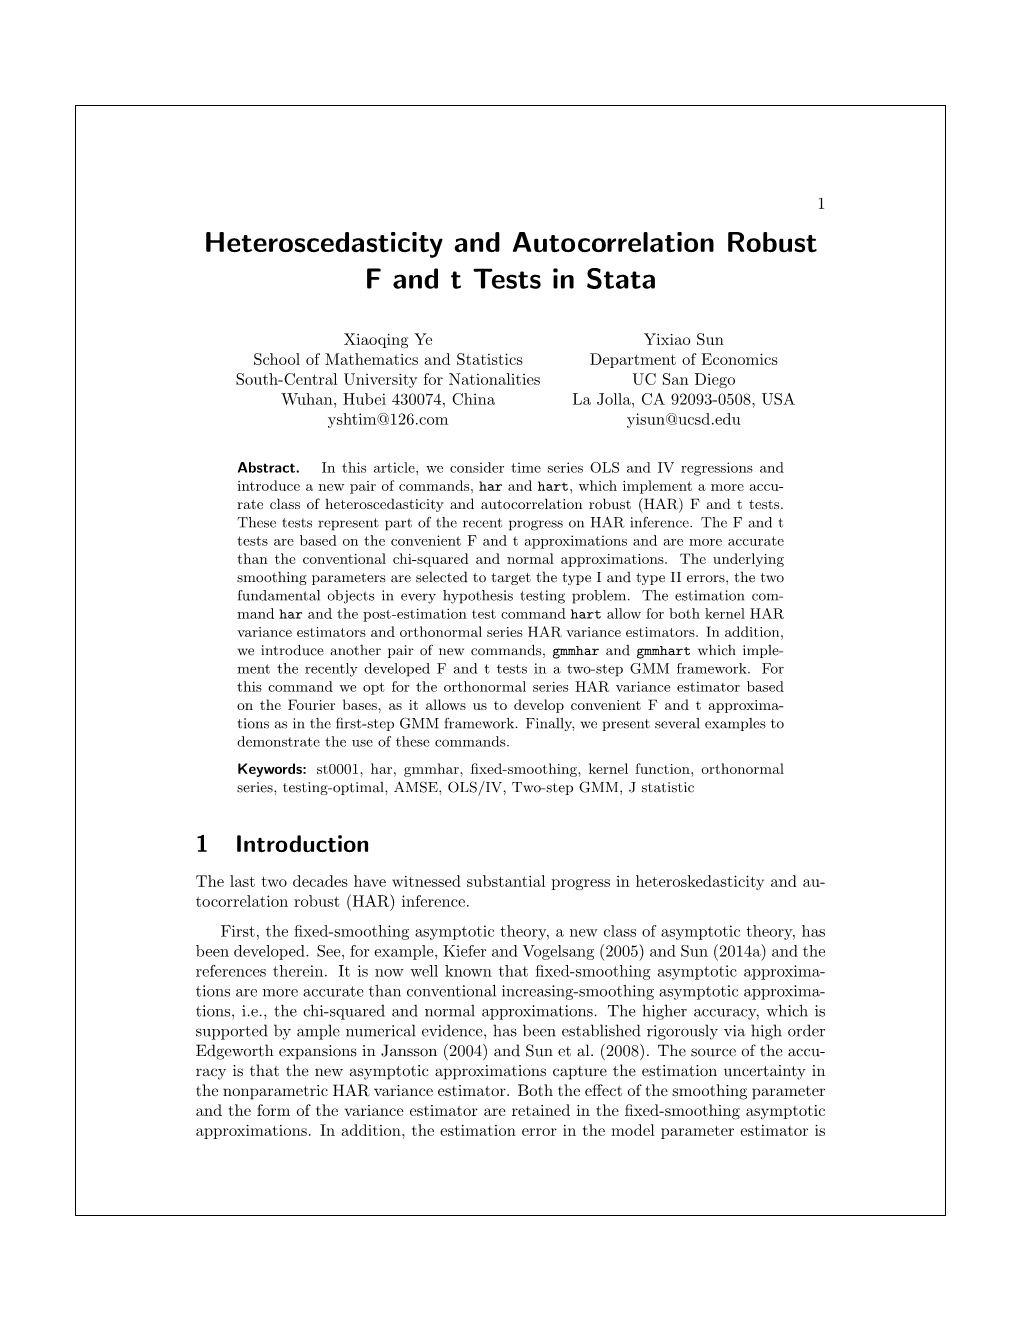 Heteroscedasticity and Autocorrelation Robust F and T Tests in Stata